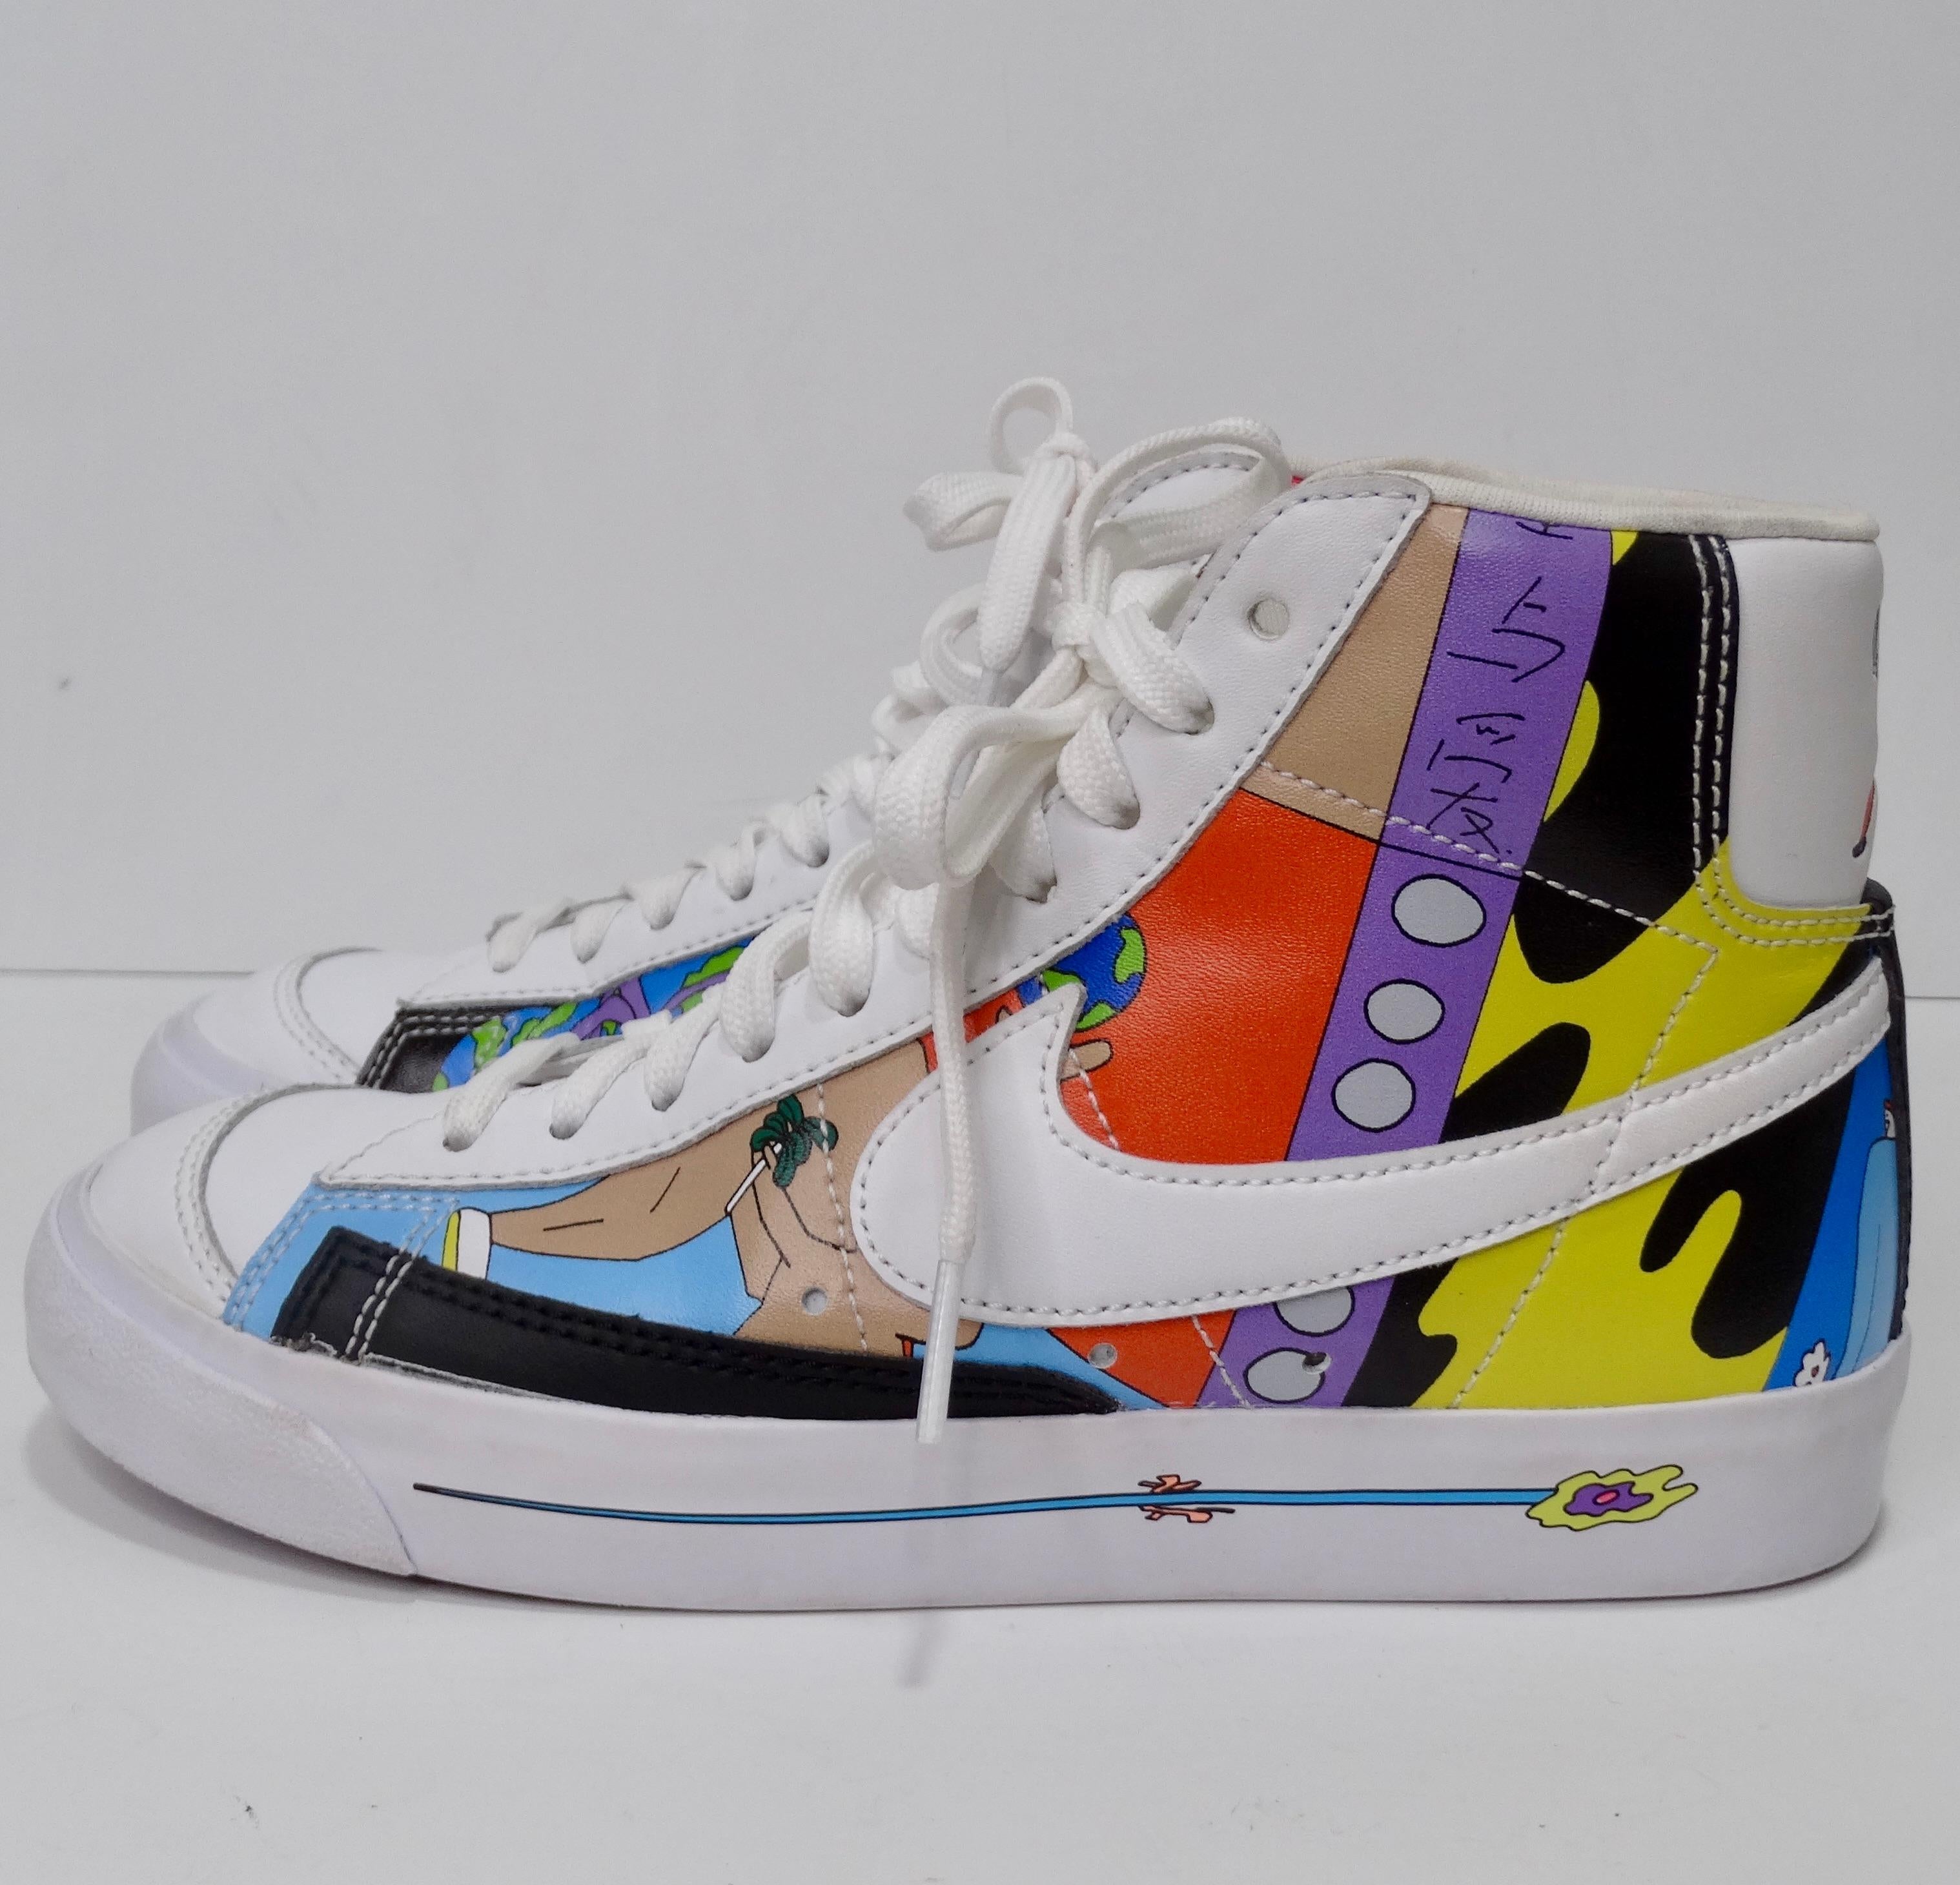 Nike Blazer Mid ’77 Flyleather Ruohan Wang Multicolor Sneakers For Sale 1